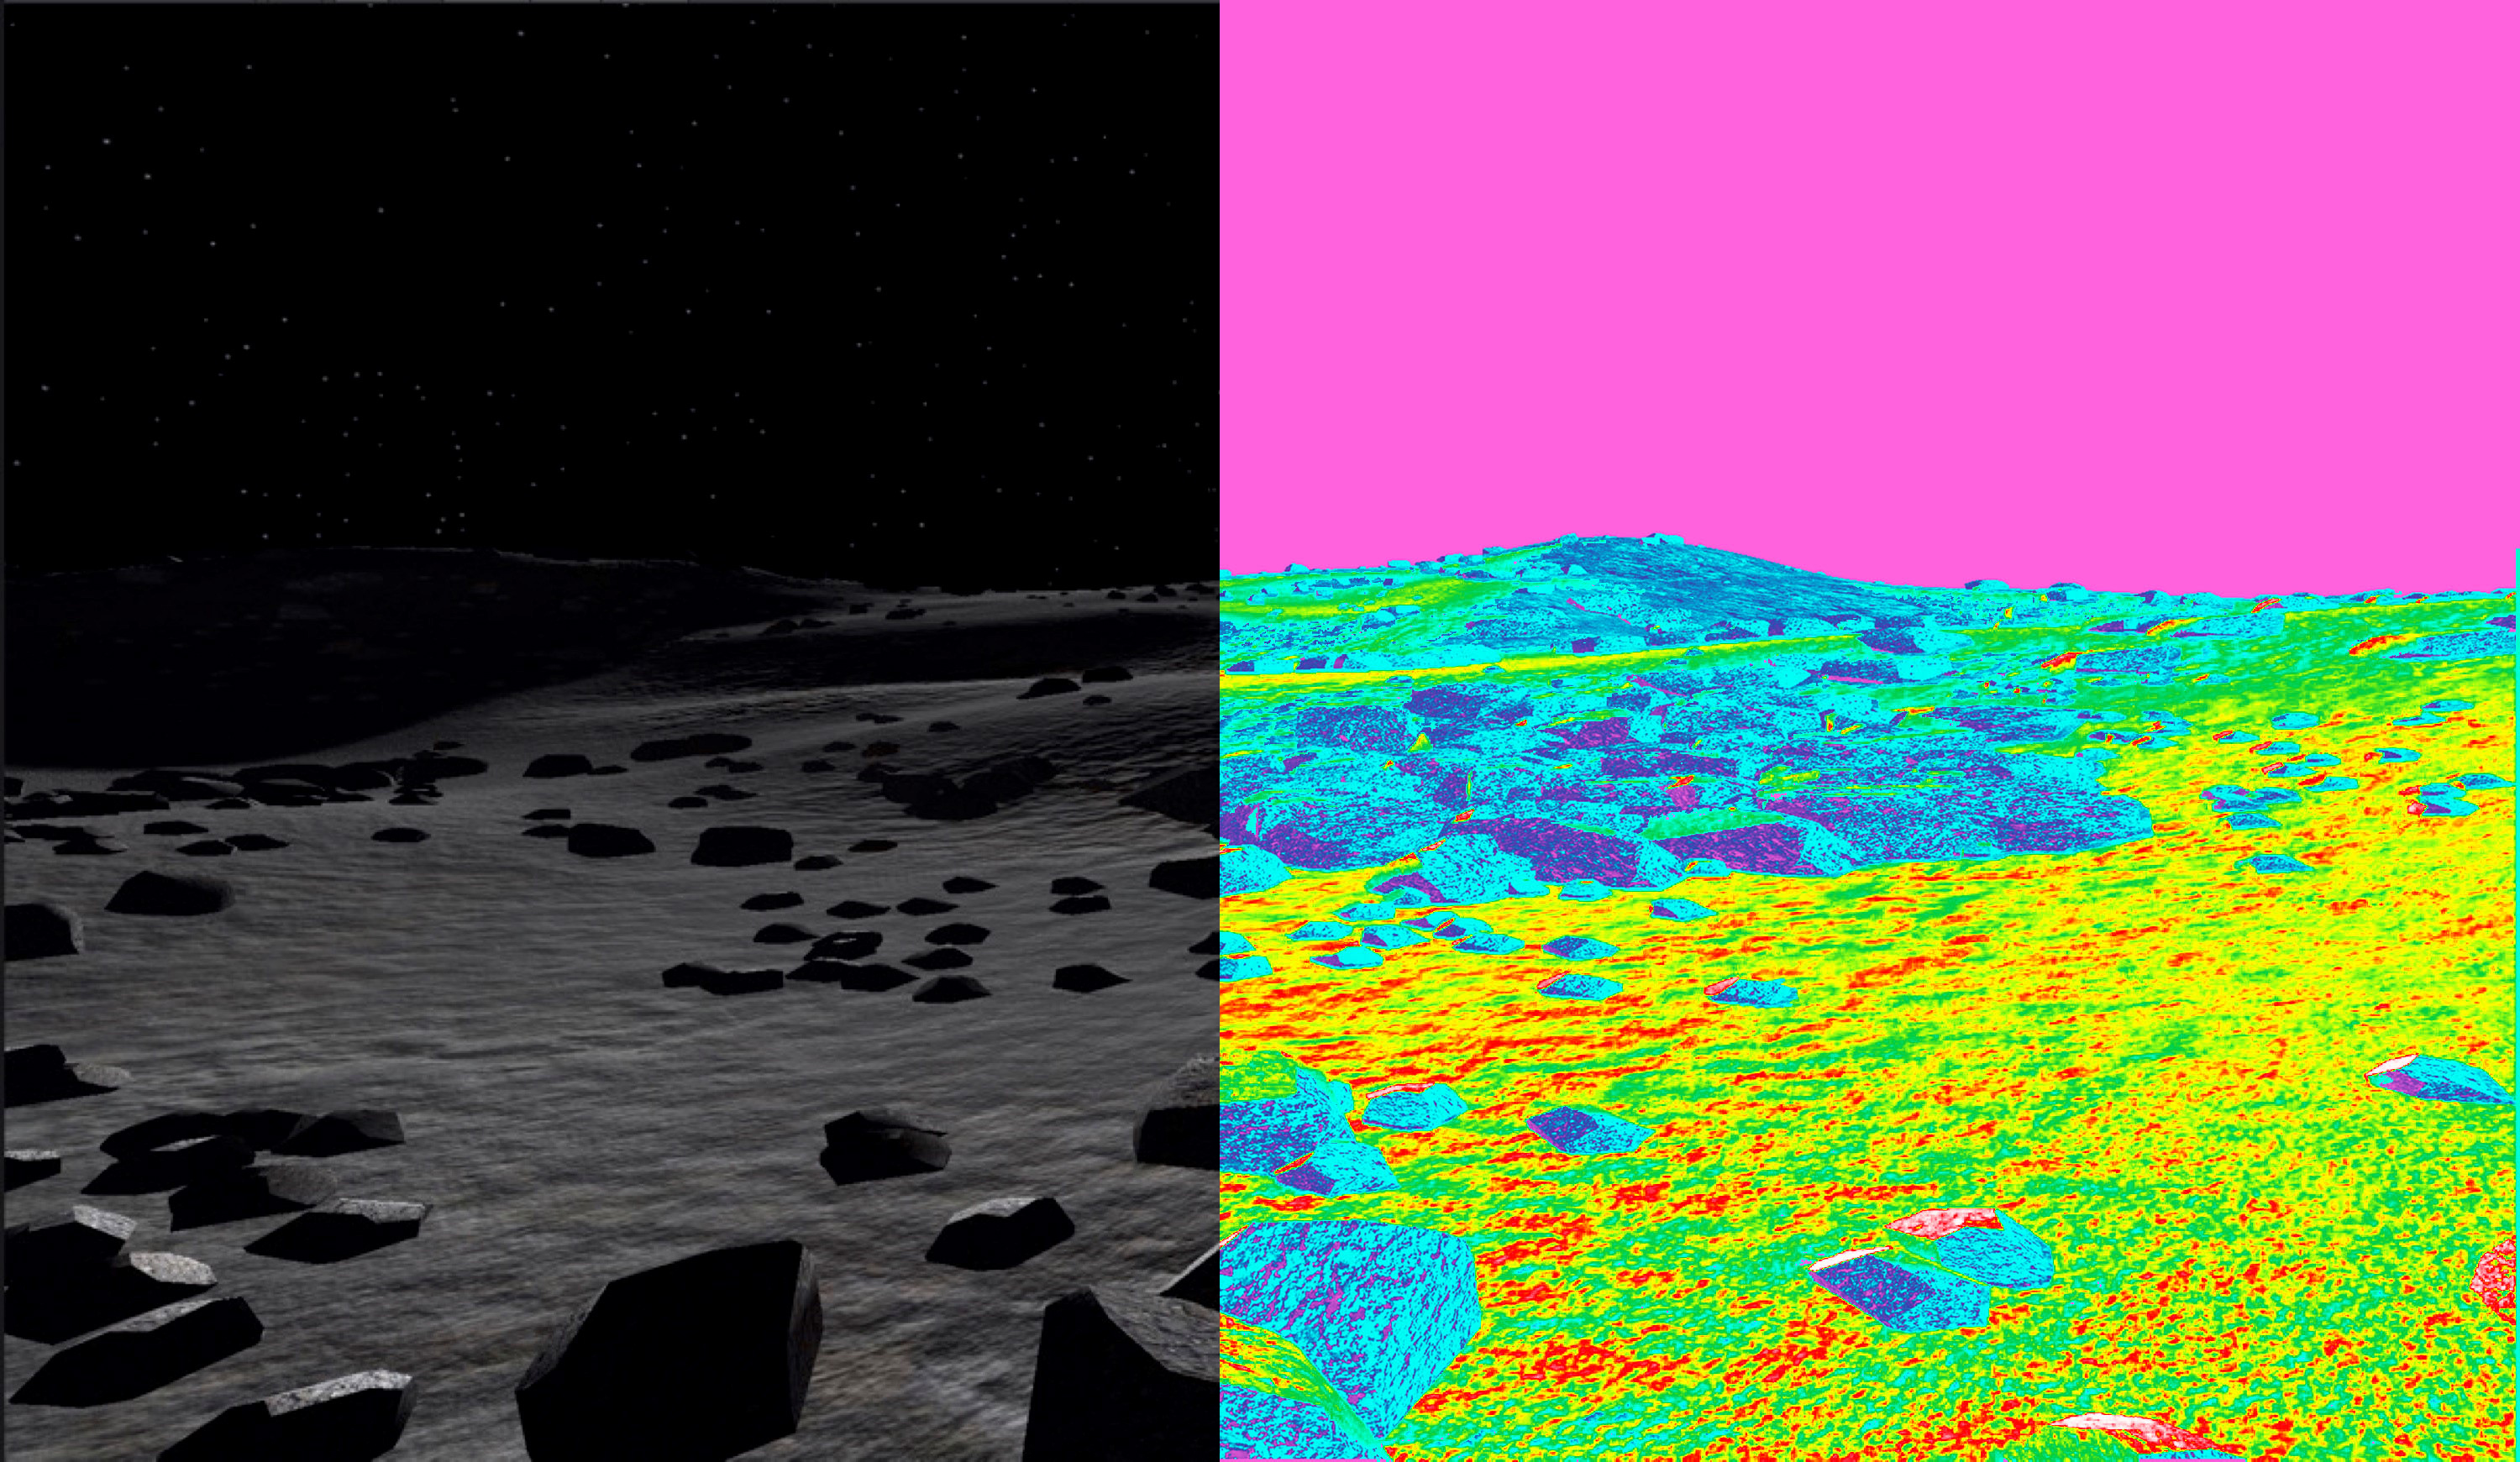 A split screen view of the Moon's surface, with the left from an eye's view, and the right from LAFORGE's view, showing colors representing temperatures